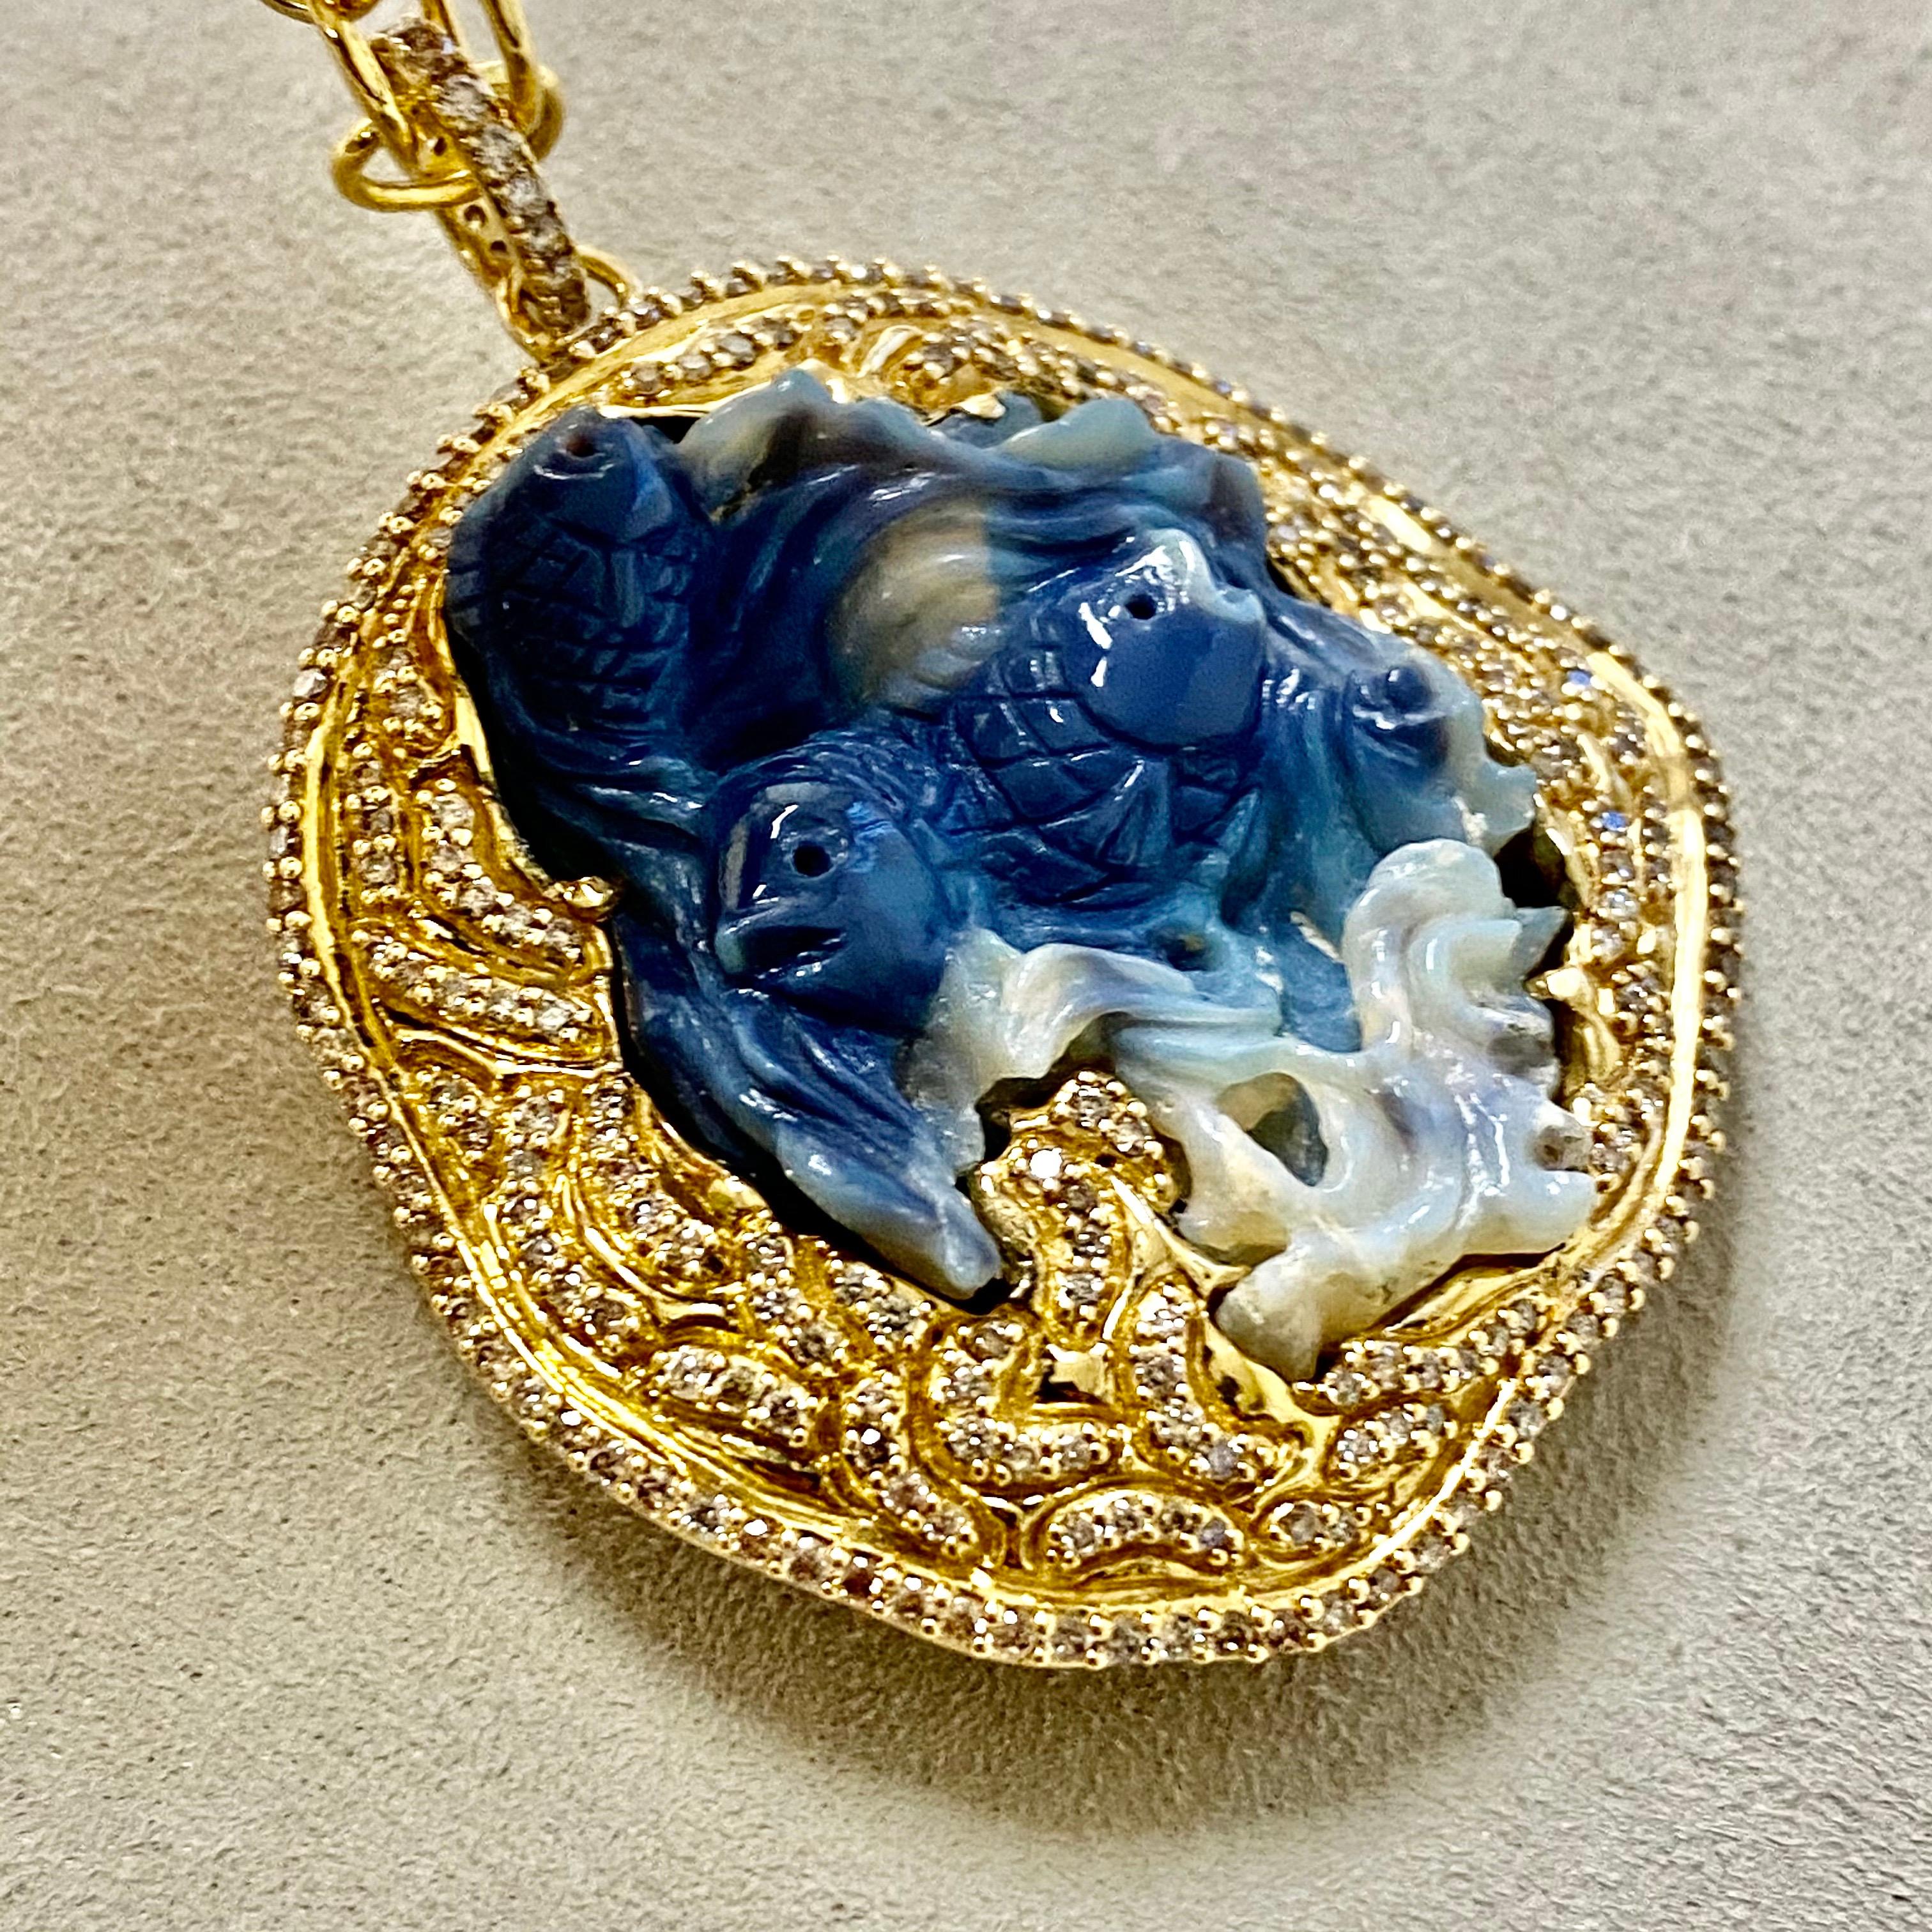 Created in 18 karat yellow gold
Hand carved Opal Fishes in waves 41 carats approx.
Diamonds 2.3 carats approx. 
Chain sold separately
Rare & One of a kind

Crafted in 18 karat yellow gold, this exceptional pendant features two intricately